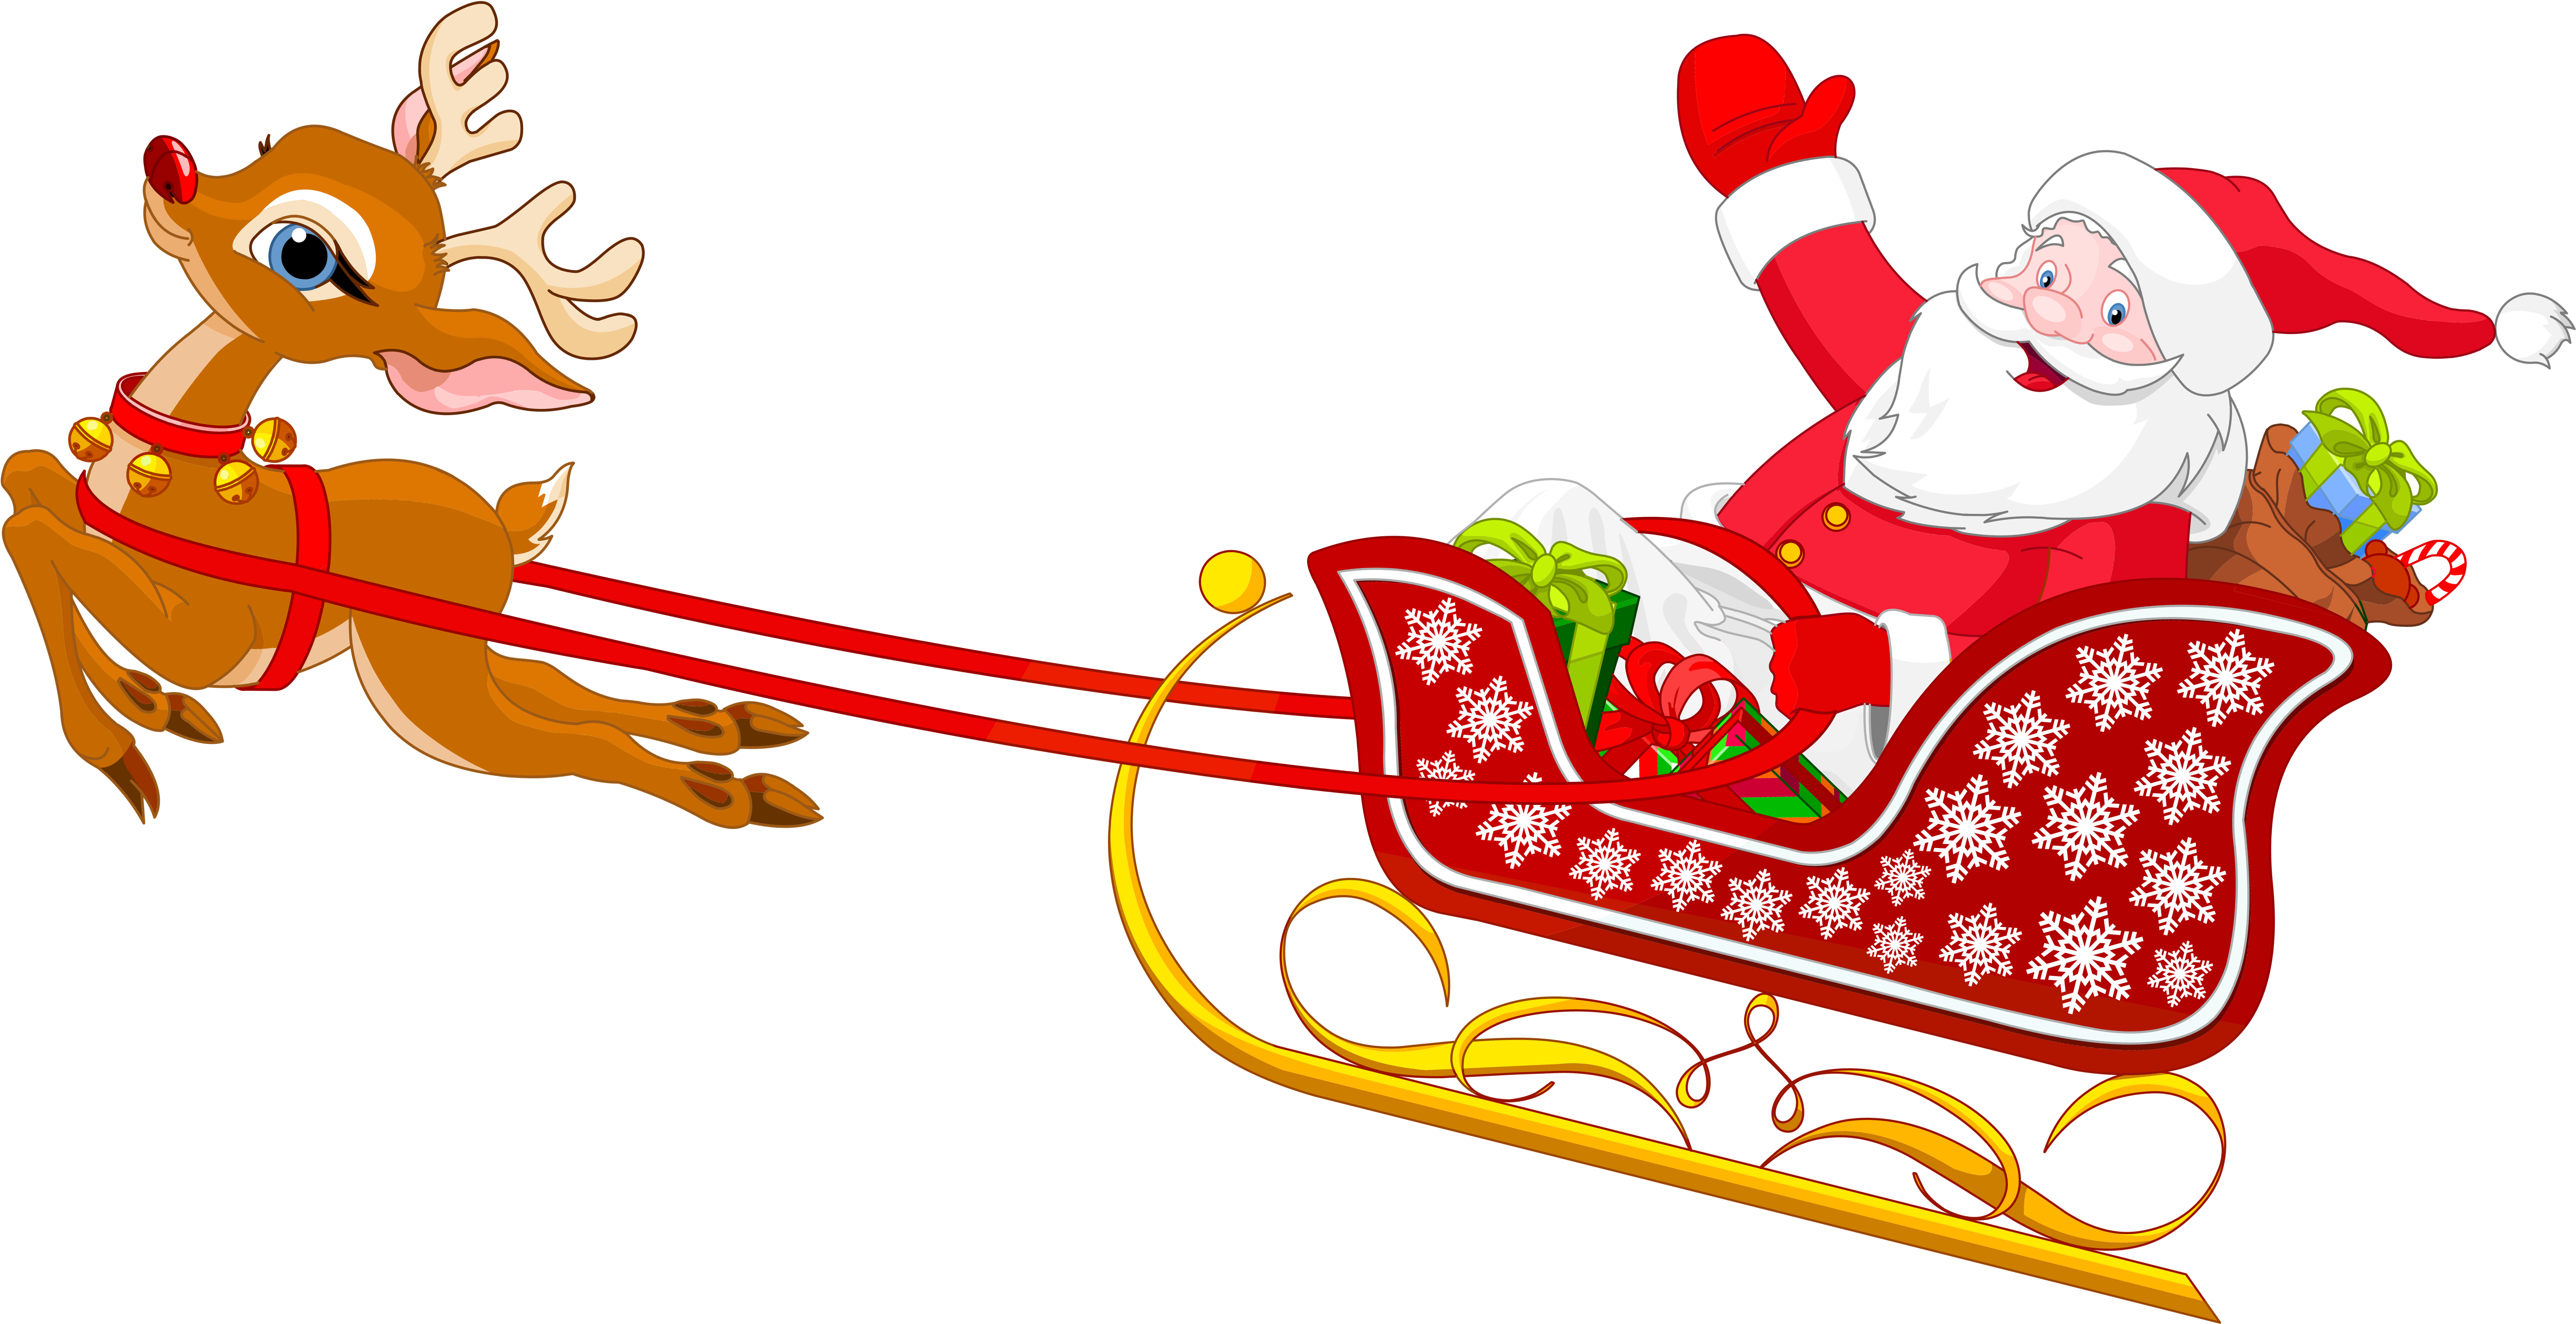 28 Collection Of Santa Sleigh Clipart Free High Quality, - Santa Claus With His Sleigh (6337x3579)